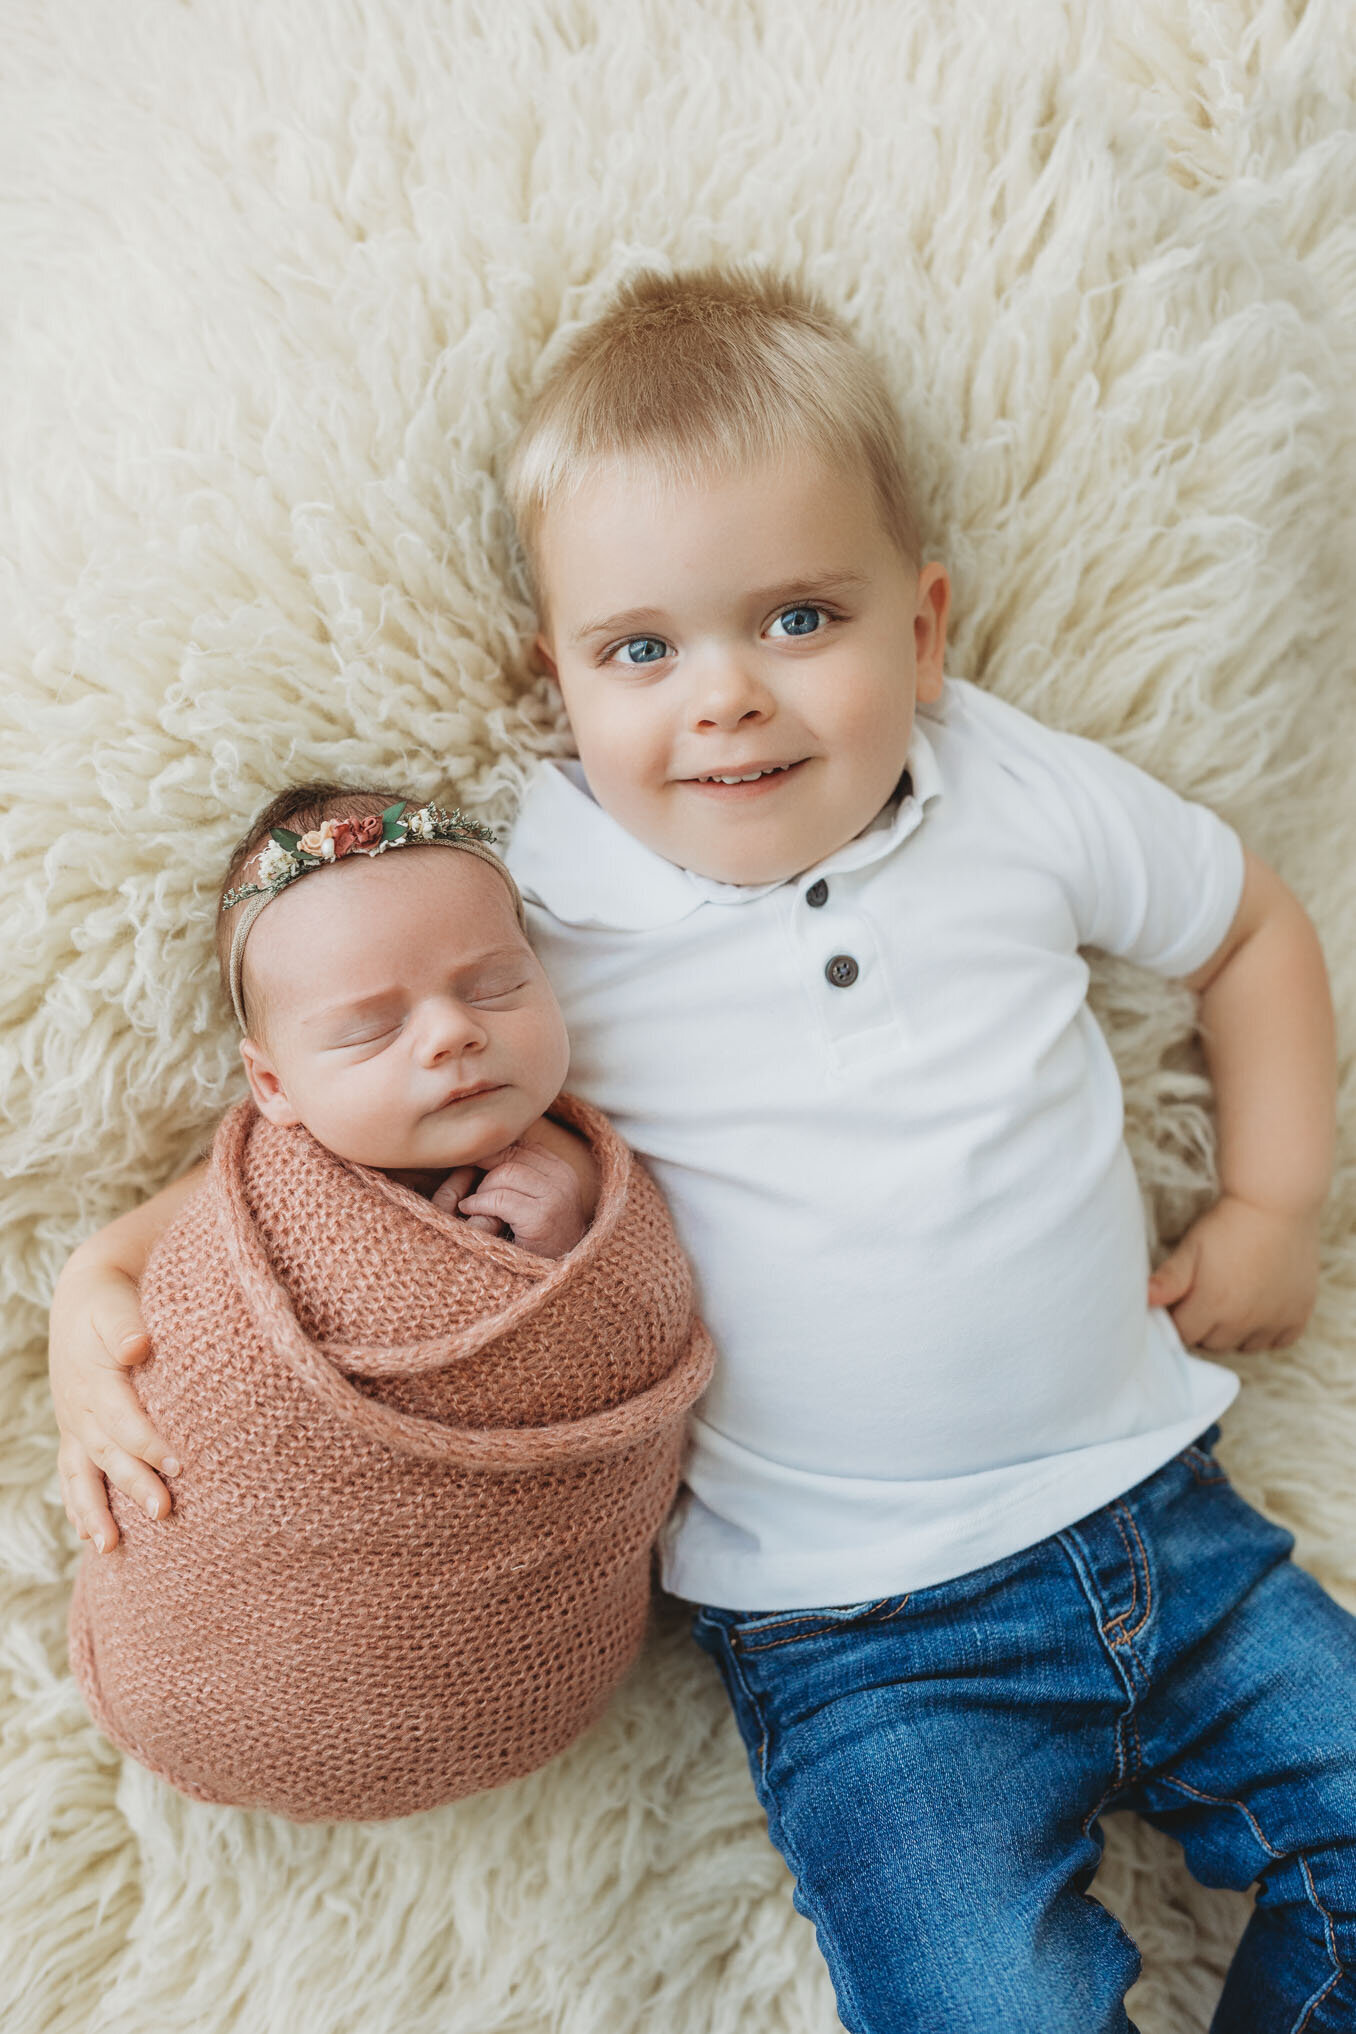 Toddler boy with his arm around his newborn baby sister